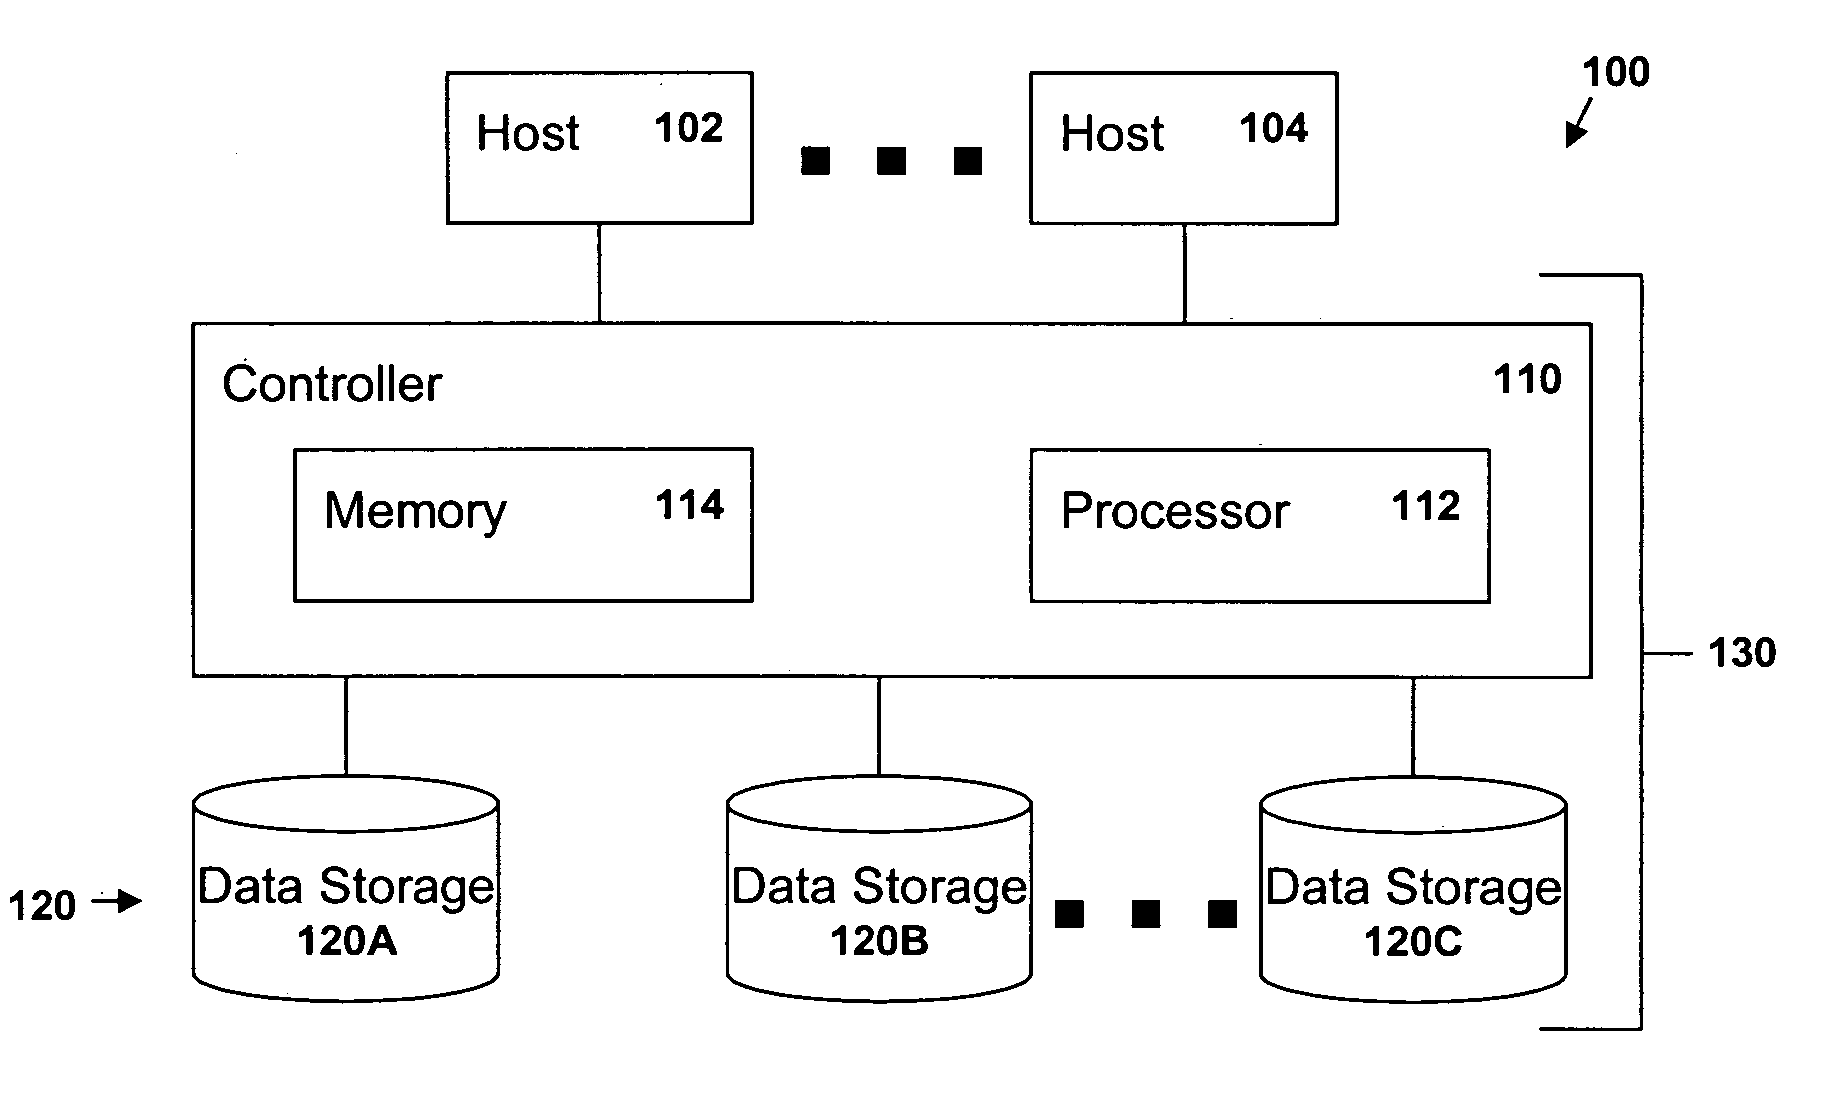 Storage of data blocks of logical volumes in a virtual disk storage subsystem